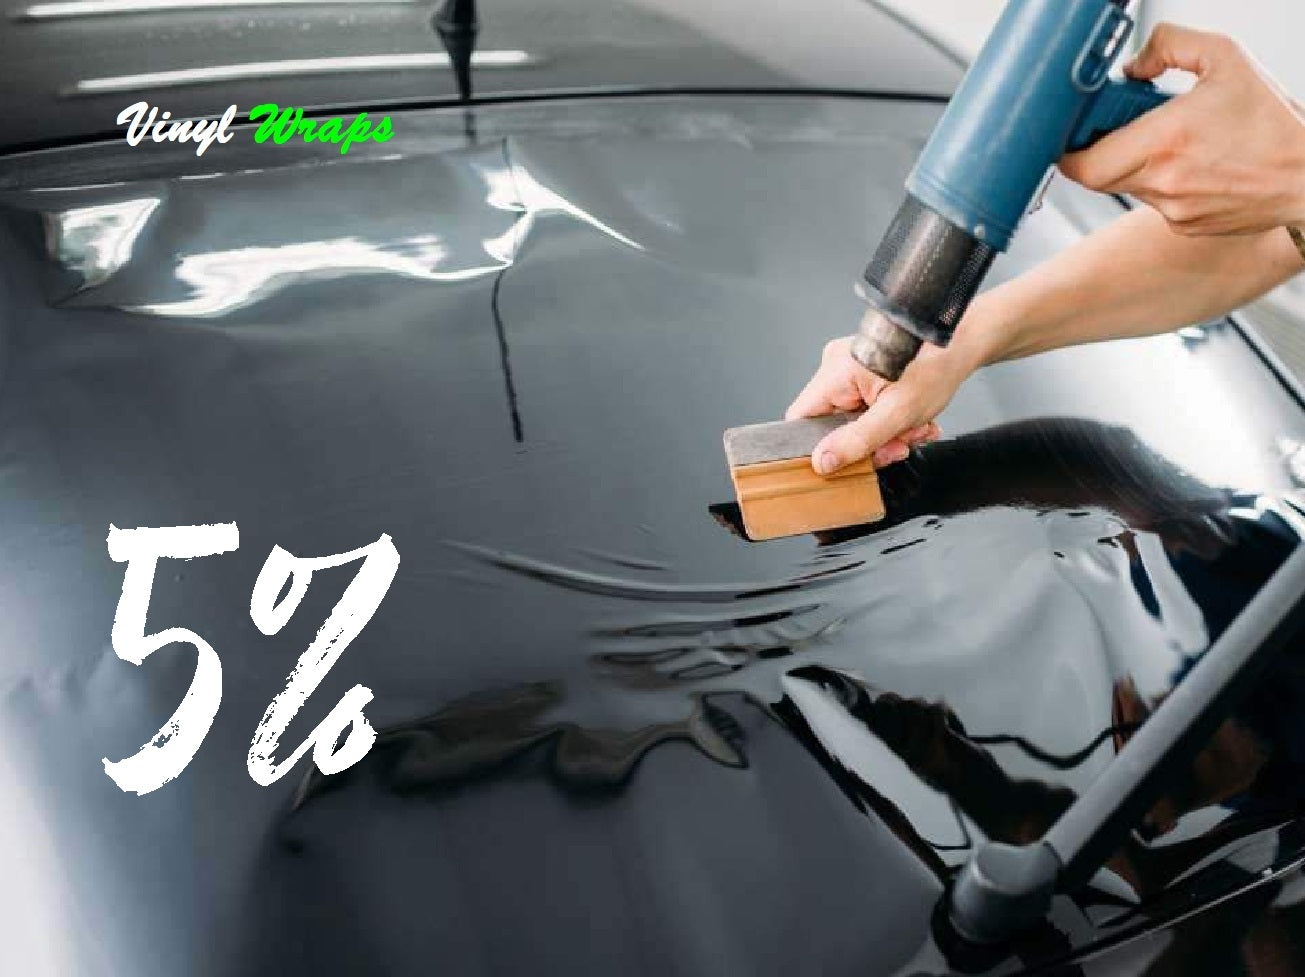 5% 75CM x 3M Black, Car Window Tint With Install Tools Included